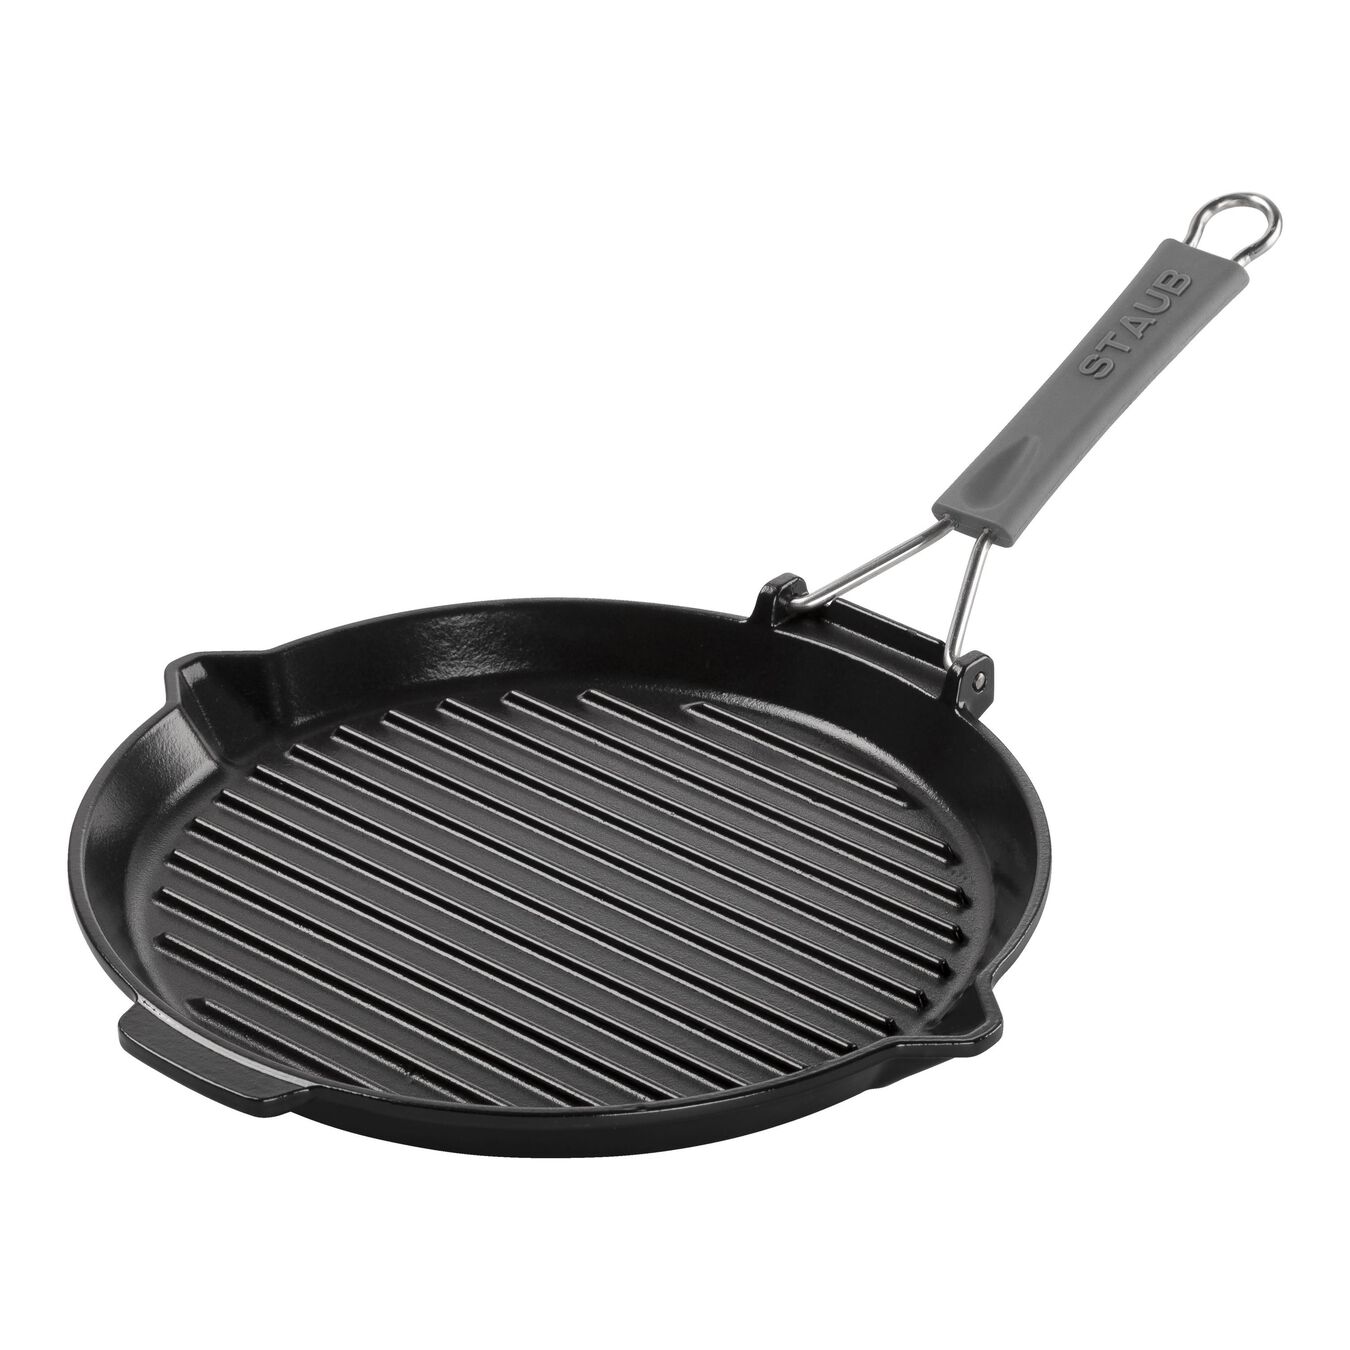 28 cm round Cast iron Grill pan with pouring spout black,,large 1